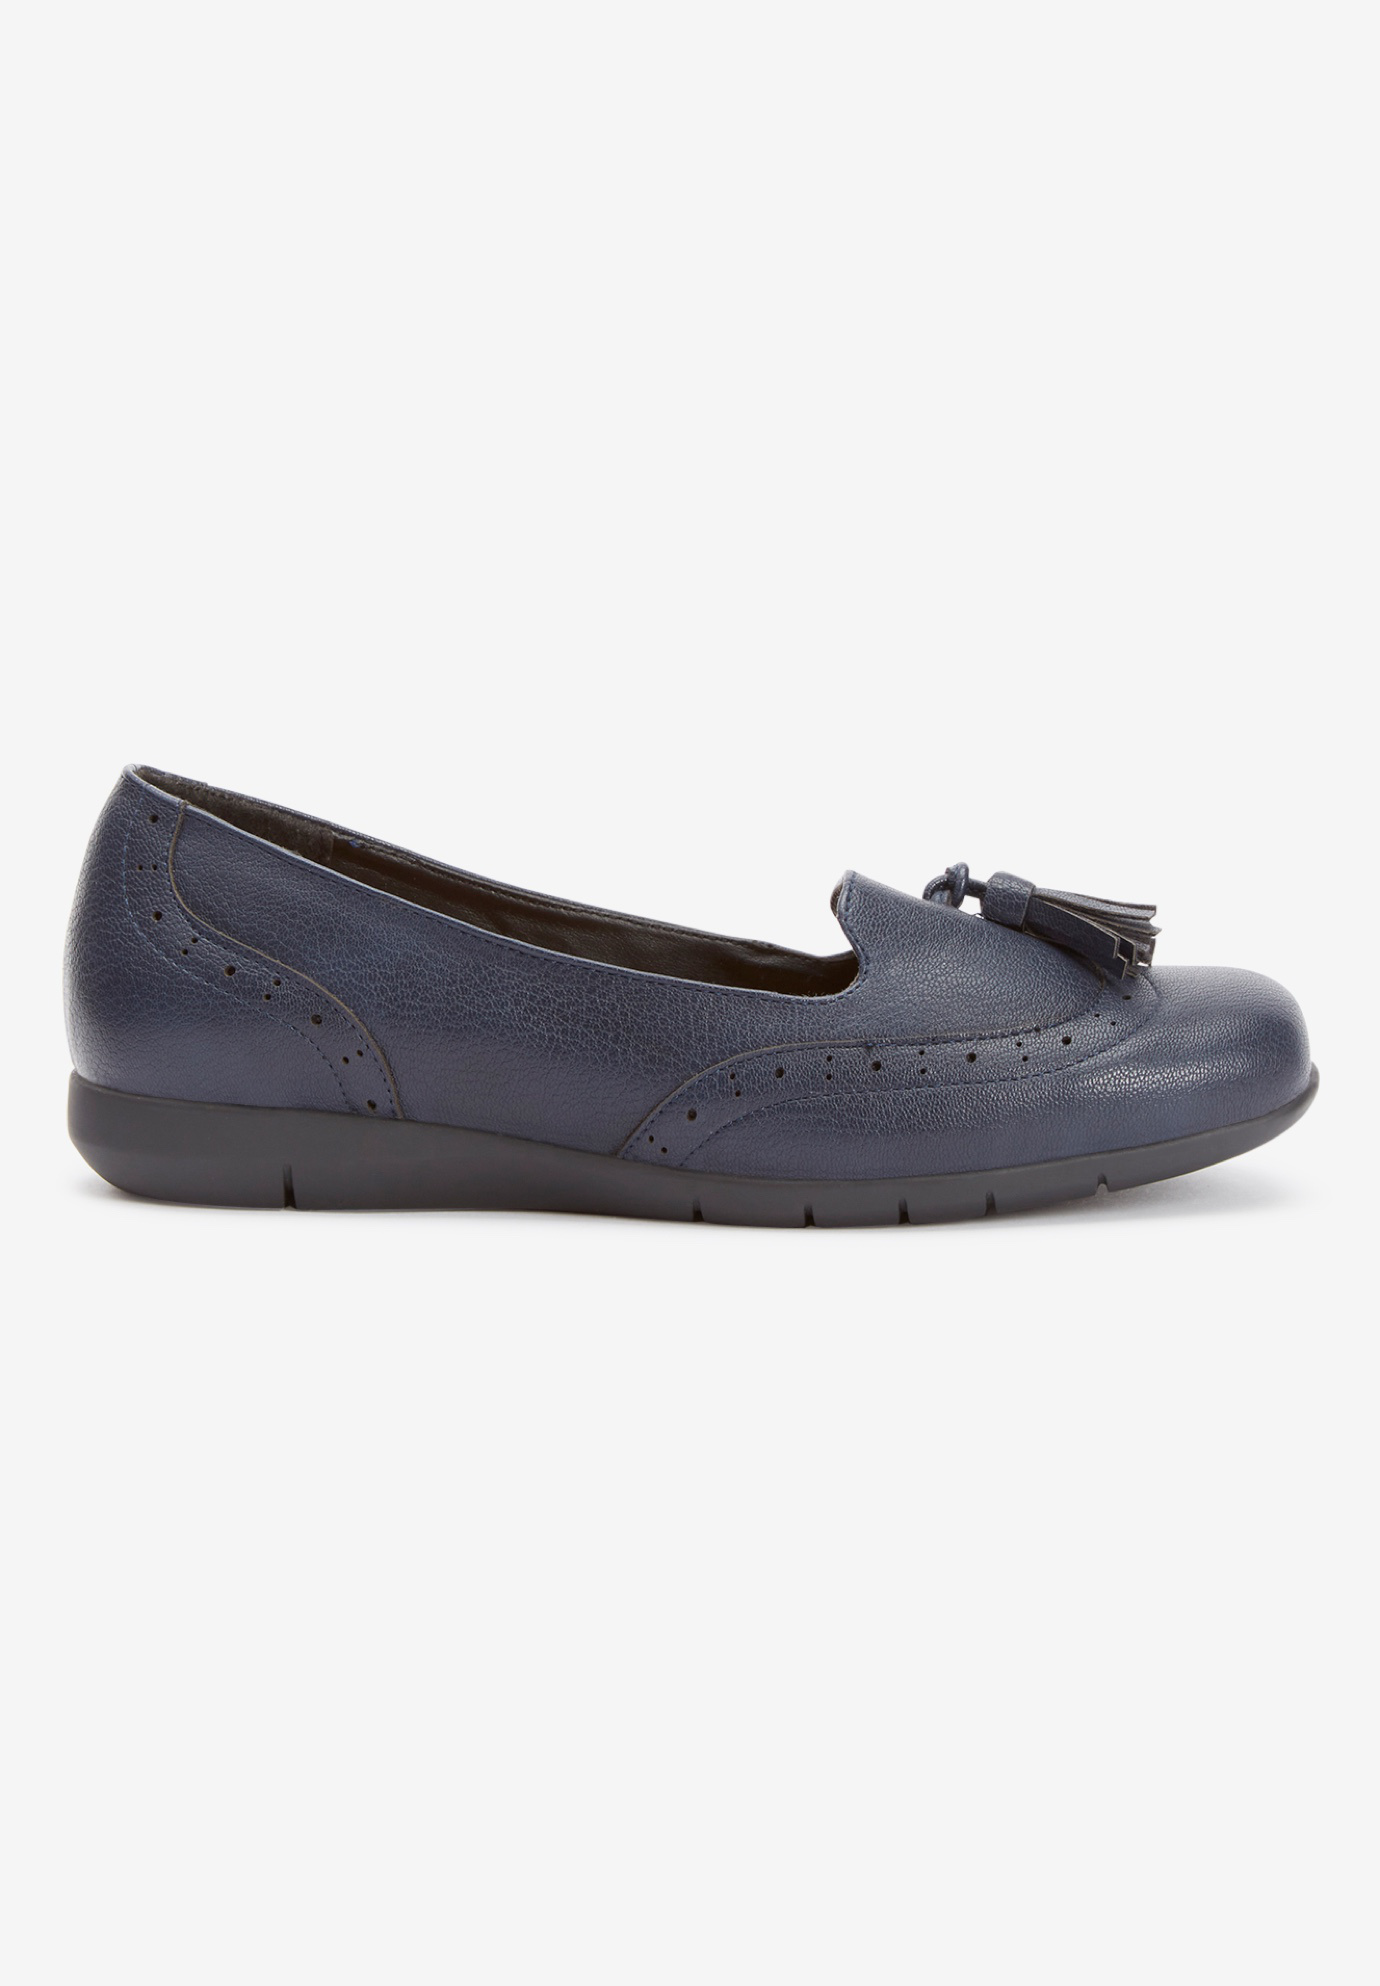 Comfortview Women's Wide Width The Aster Slip On Flat Shoes - image 5 of 7